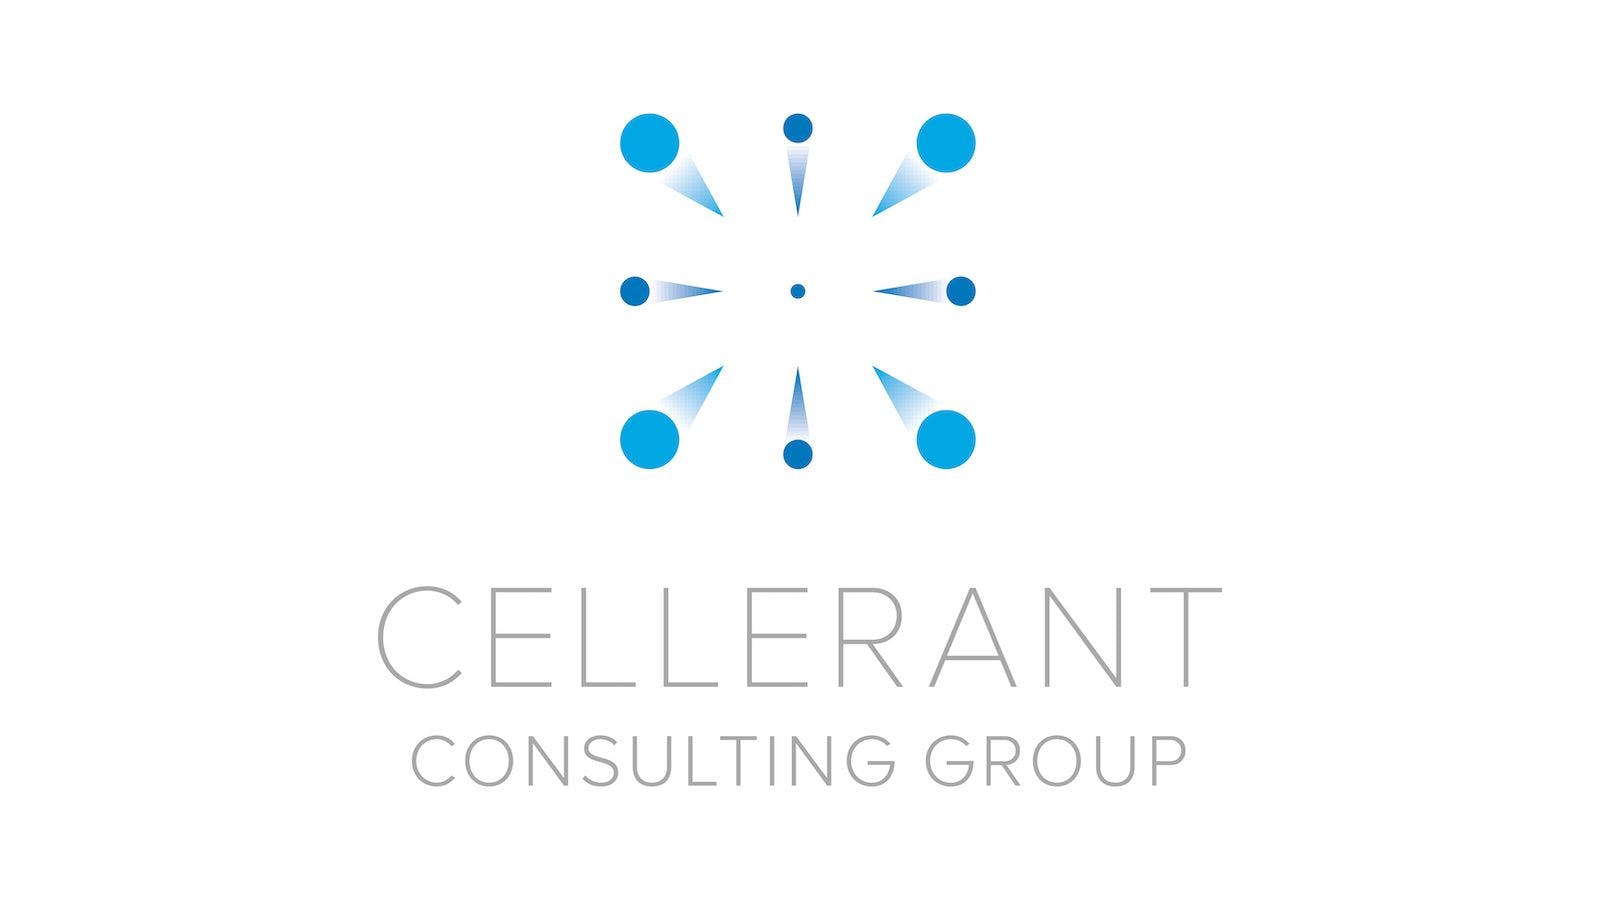 Cellerant Consulting Group Logo | Cellerant Consulting Group